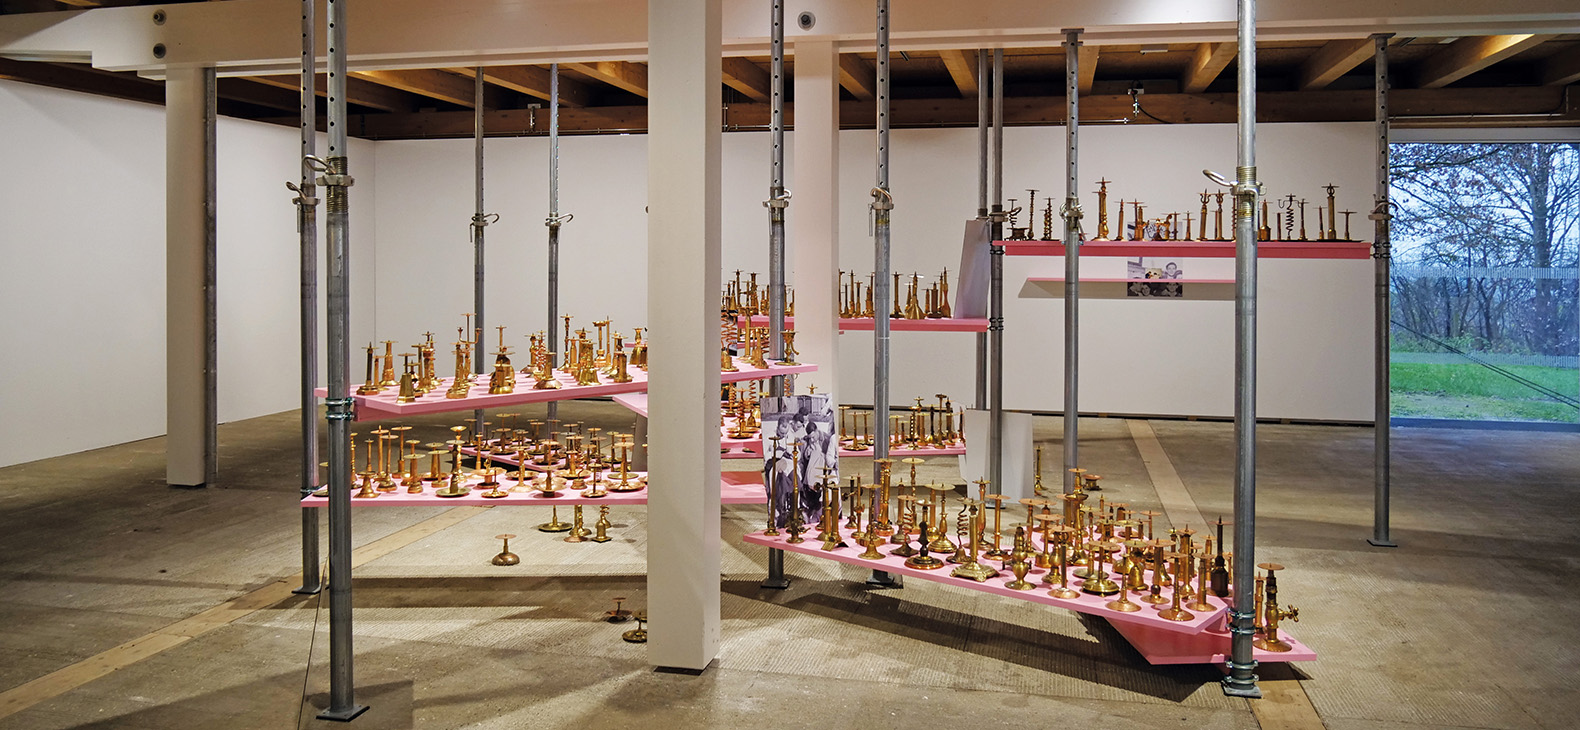 View into the exhibition; installation "Die Aufstellung" by Rebekka Bauer with several hundred metal objects on pink boards between construction supports as well as free-standing photo plates